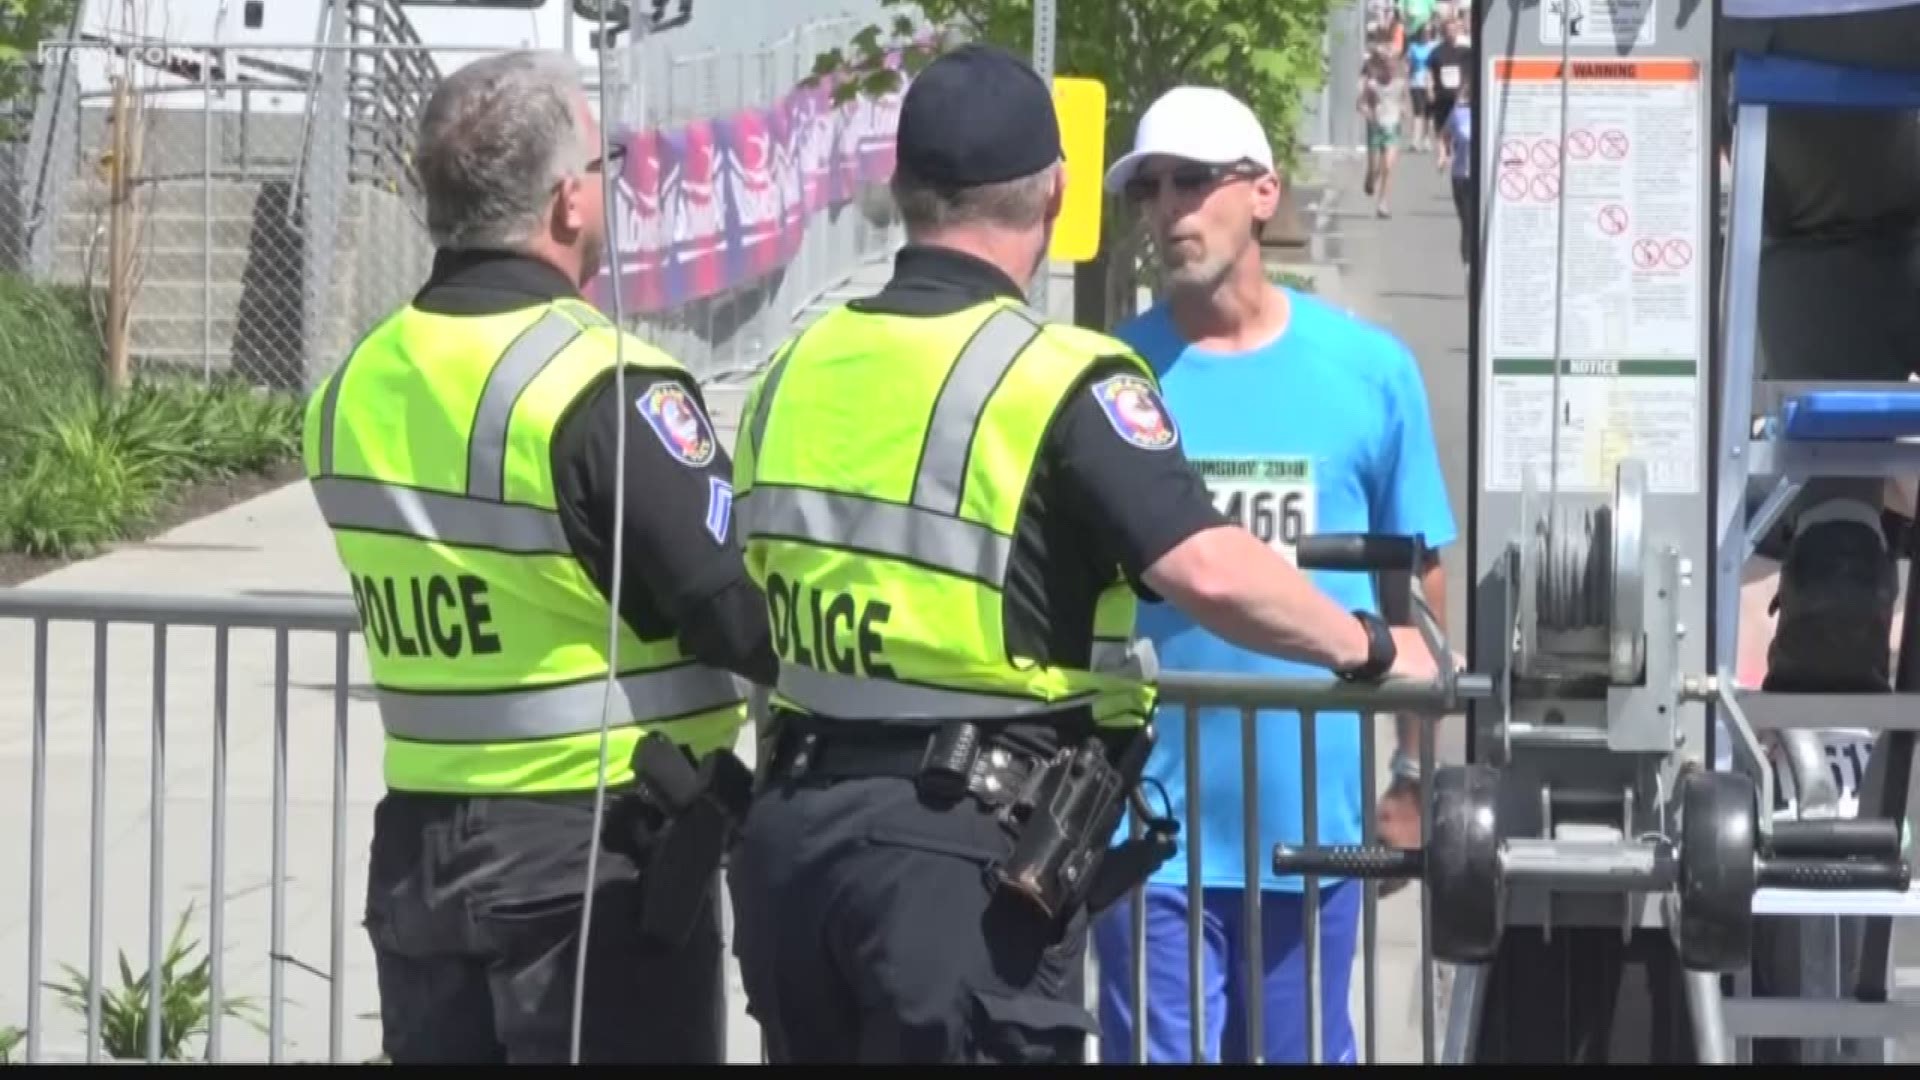 KREM Reporter Alexa Block spoke with Hoopfest Executive Director Matt Santangelo about the rising costs of security for the event and what it means for the future.